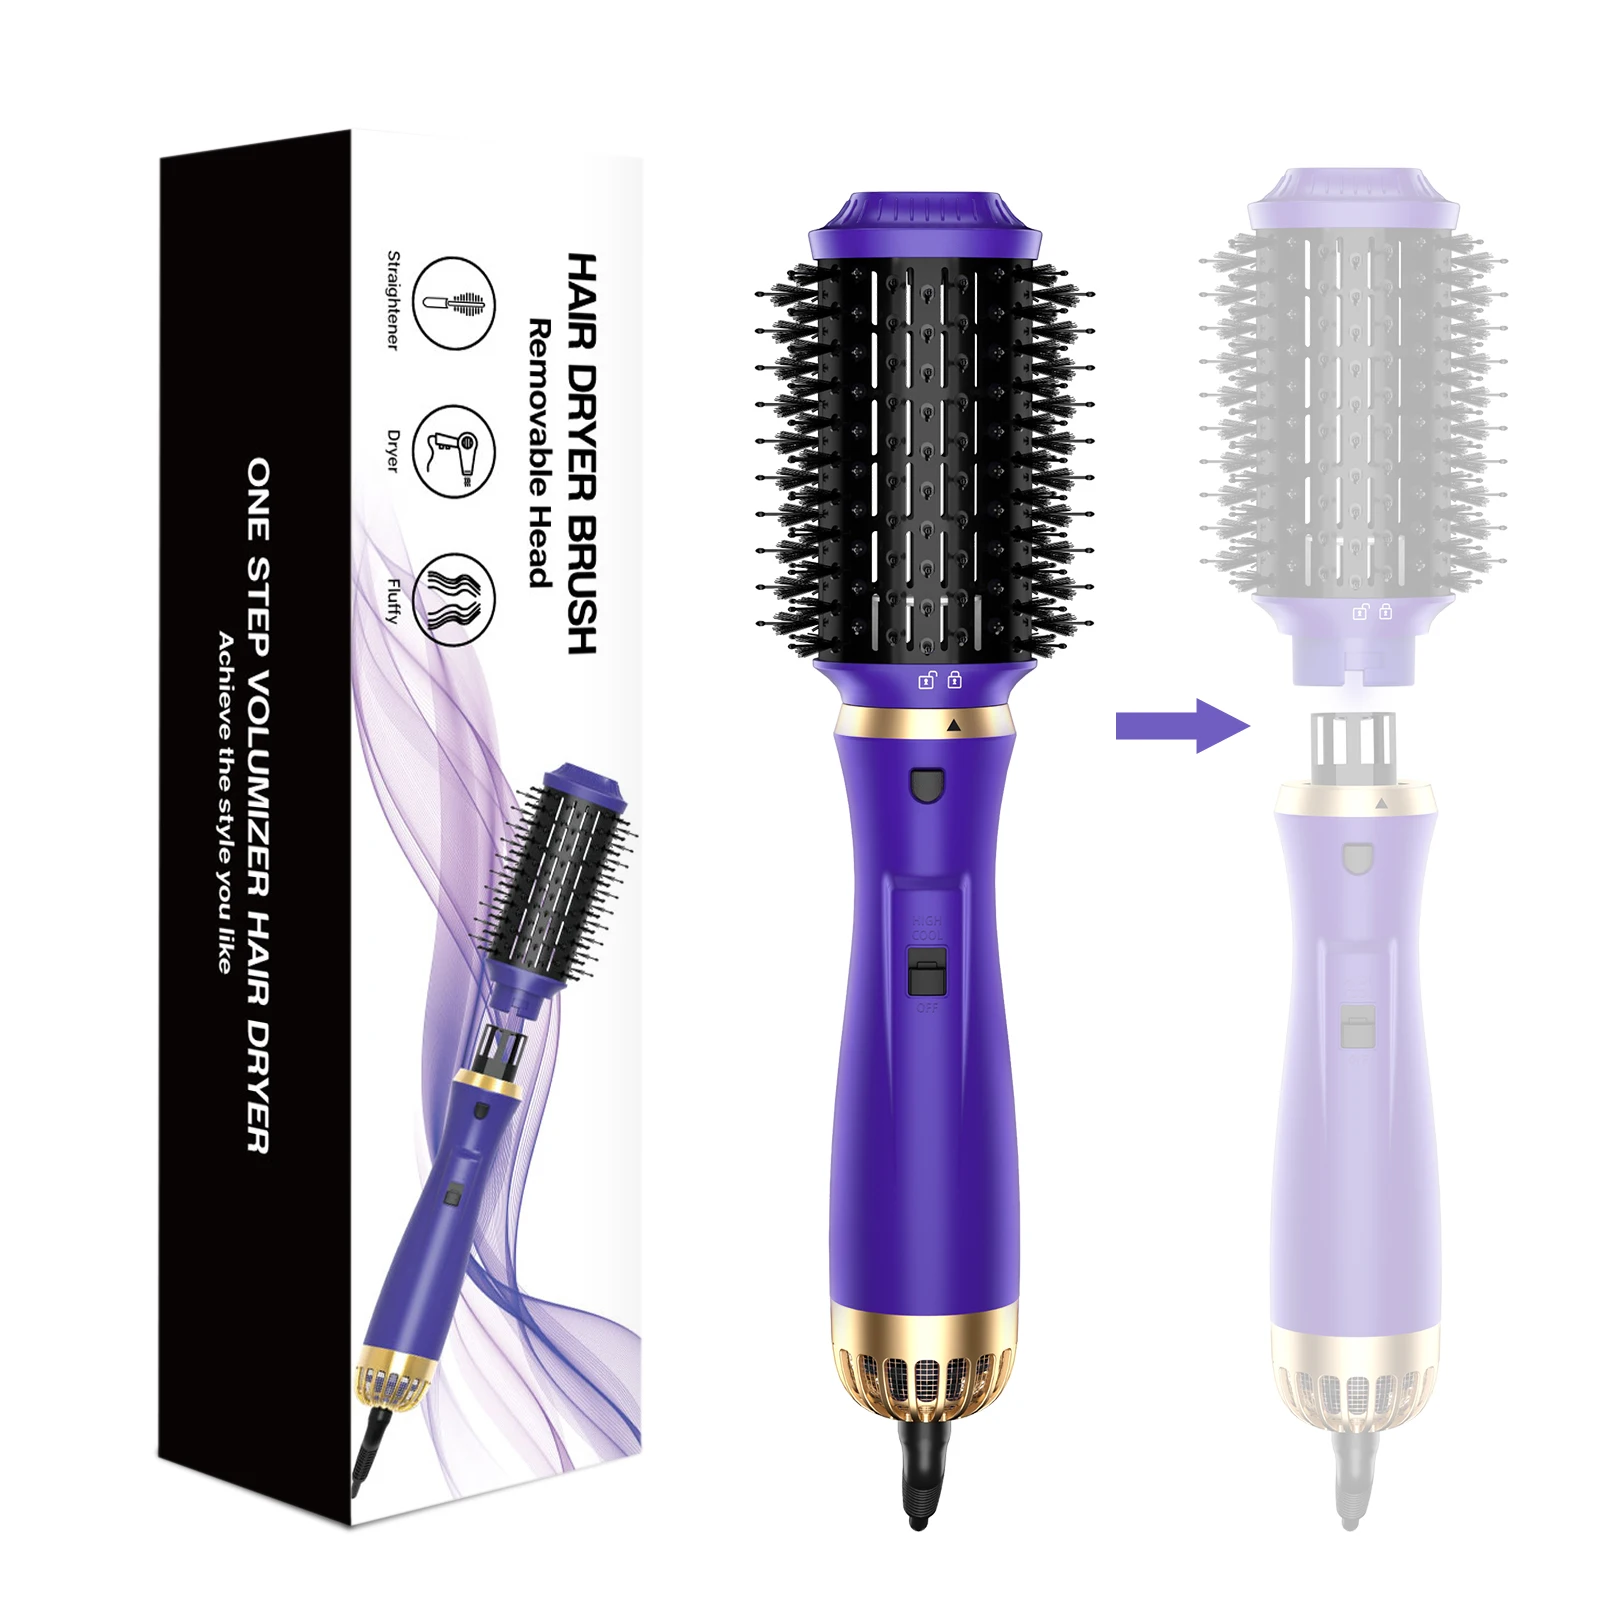 

1200W Hair Dryer Blow Dryer Brush 3 In 1 Hot Air Styling Comb One Step Hair Styling Tool Hairdryer Hairbrush Curling Iron Styler